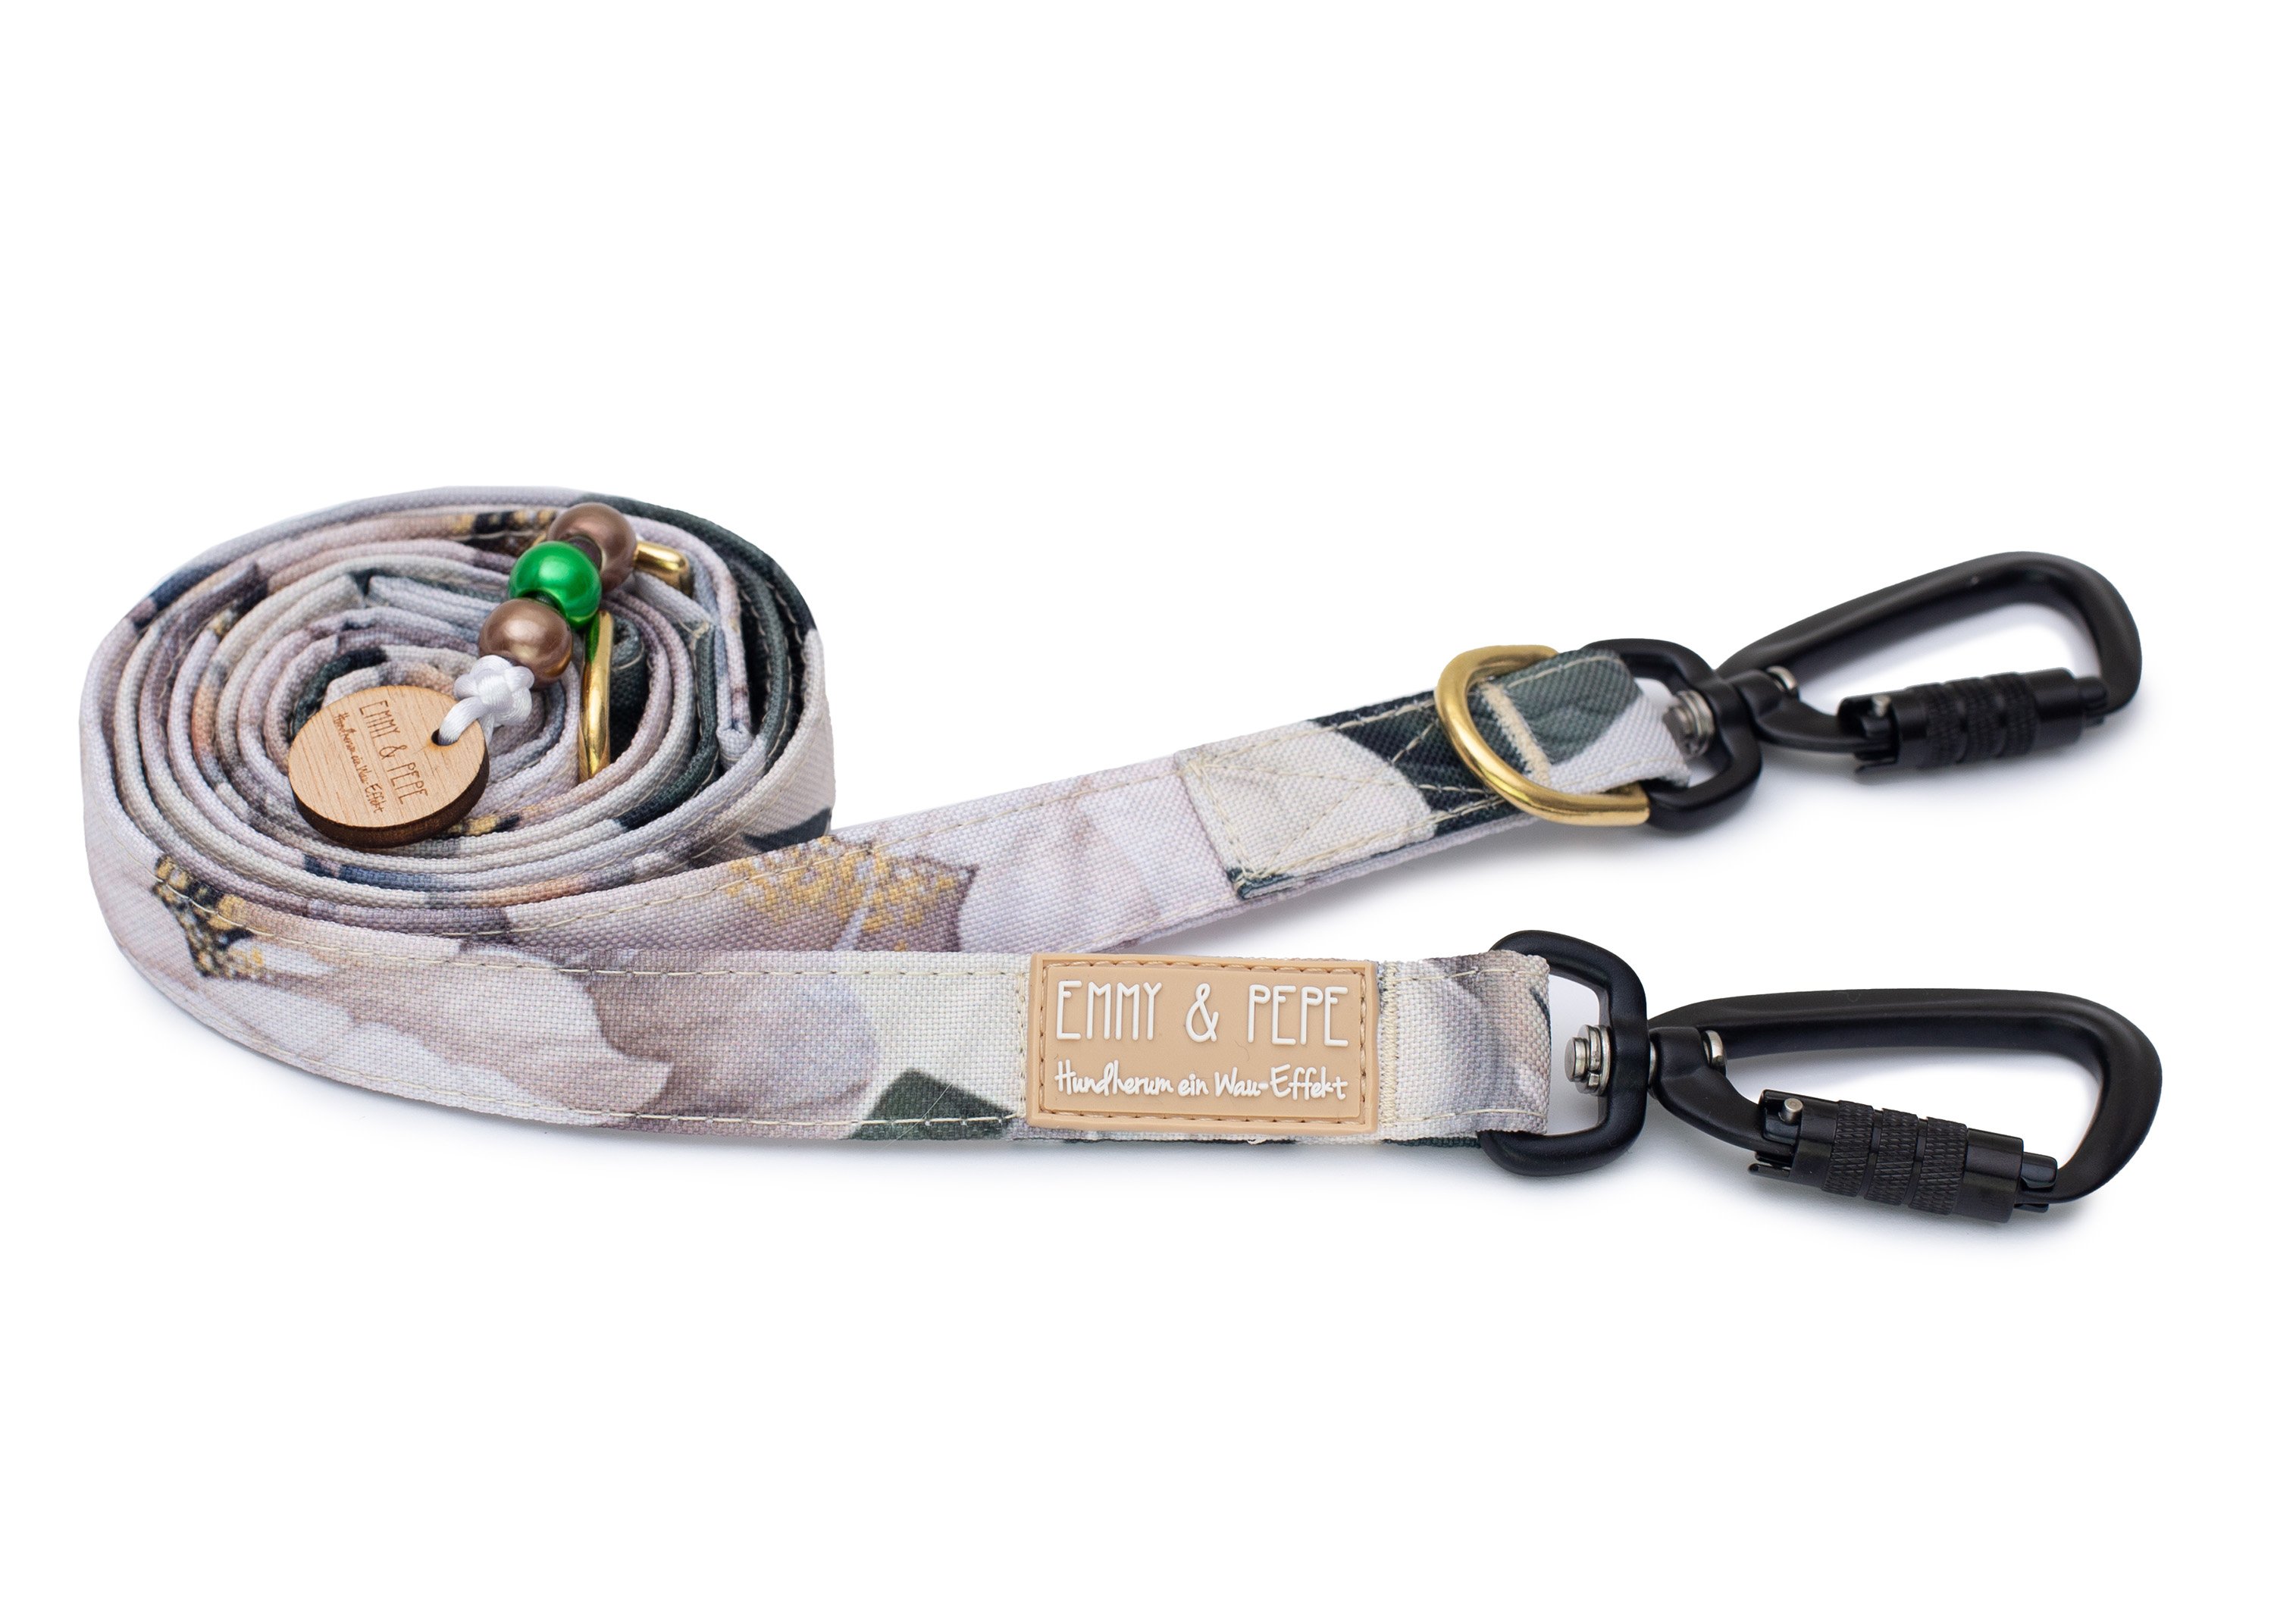 Magnolia dog leash with safety carabiner